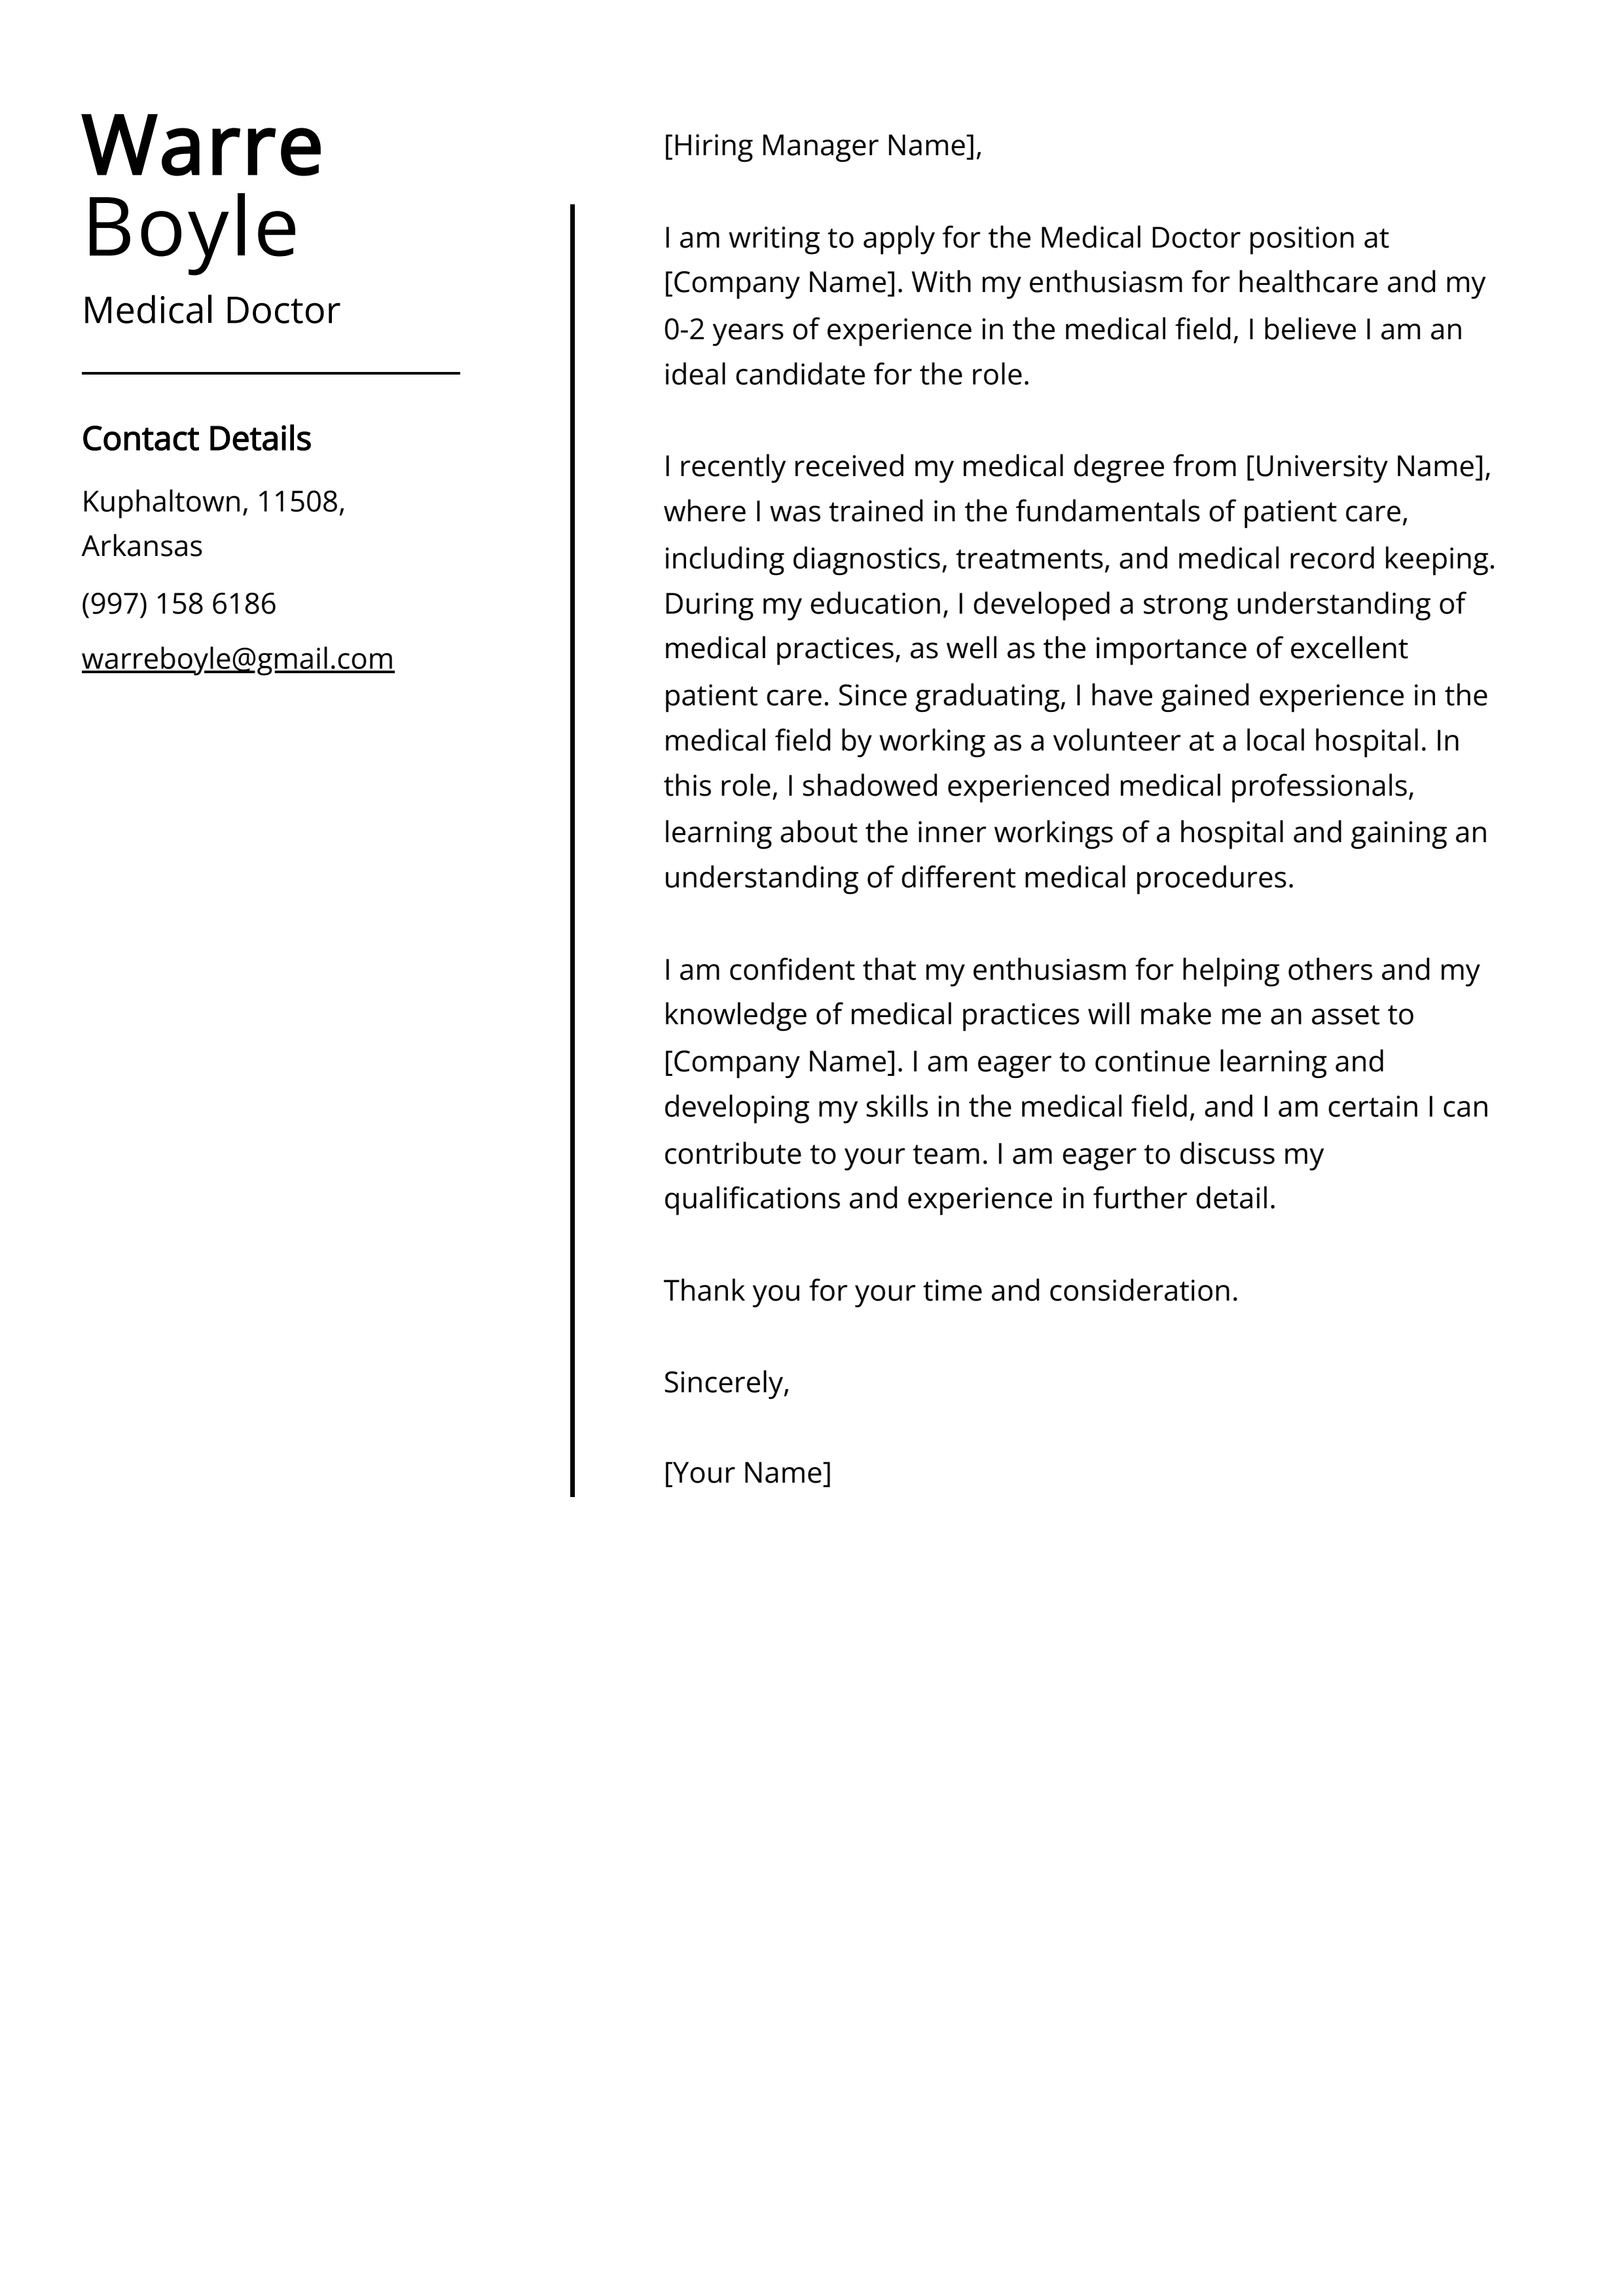 Medical Doctor Cover Letter Example